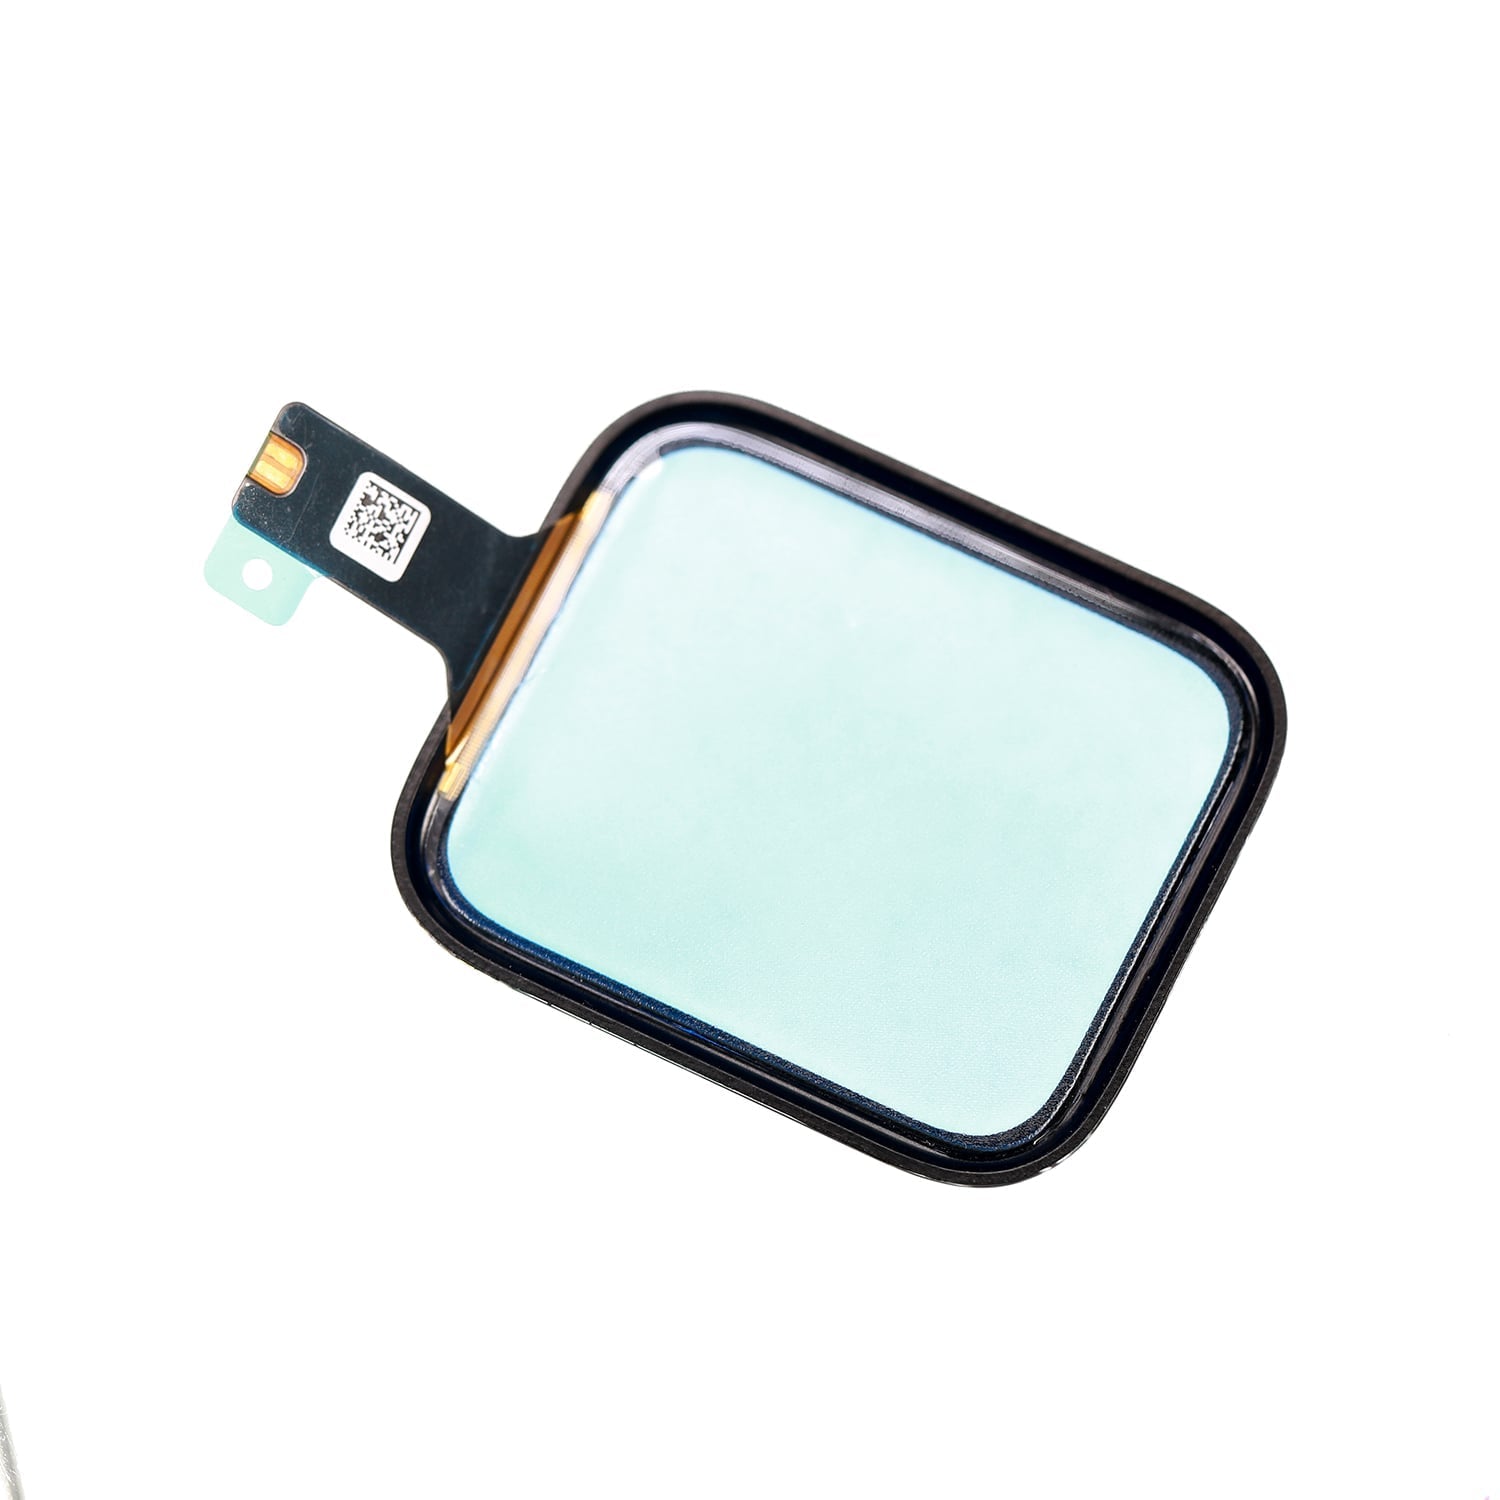 FRONT GLASS LENS FOR APPLE WATCH S4 40MM